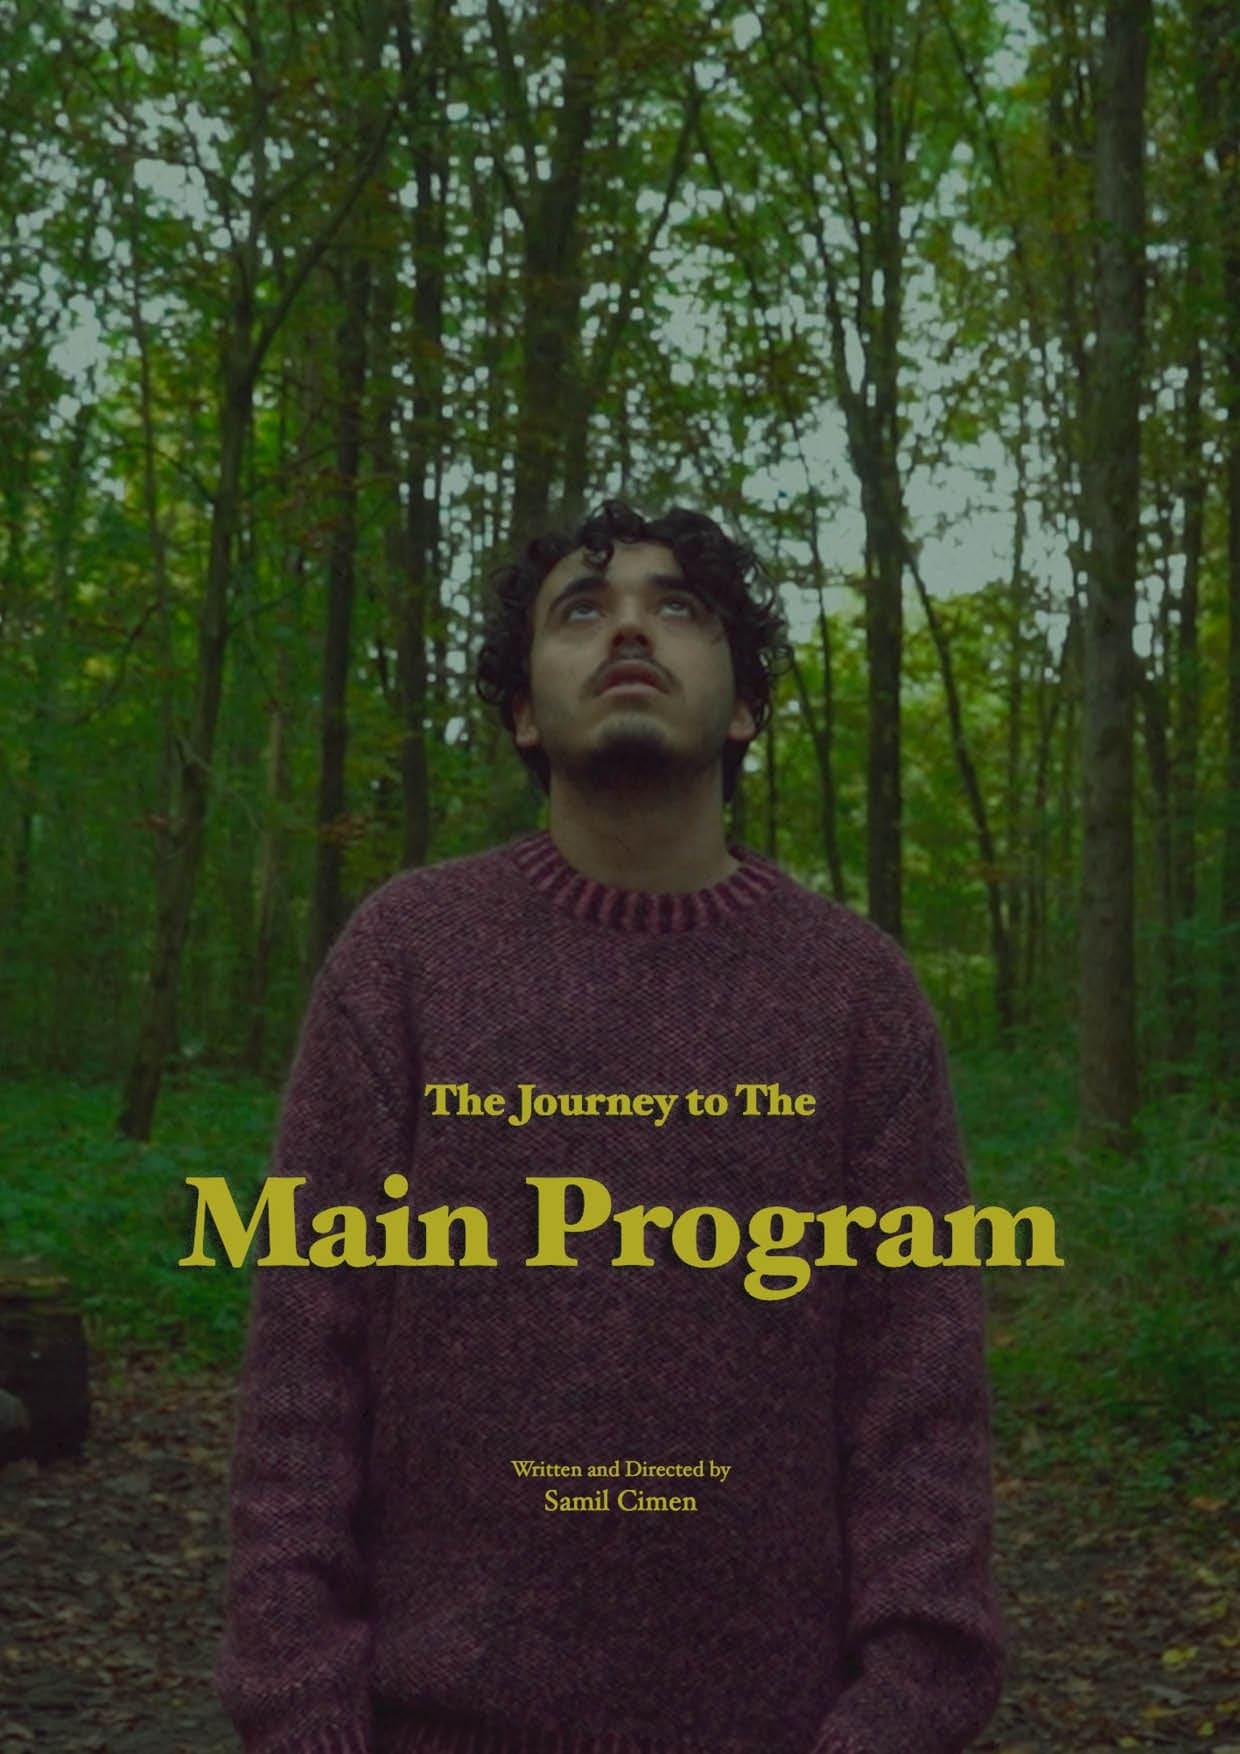 The Journey to The Main Program poster